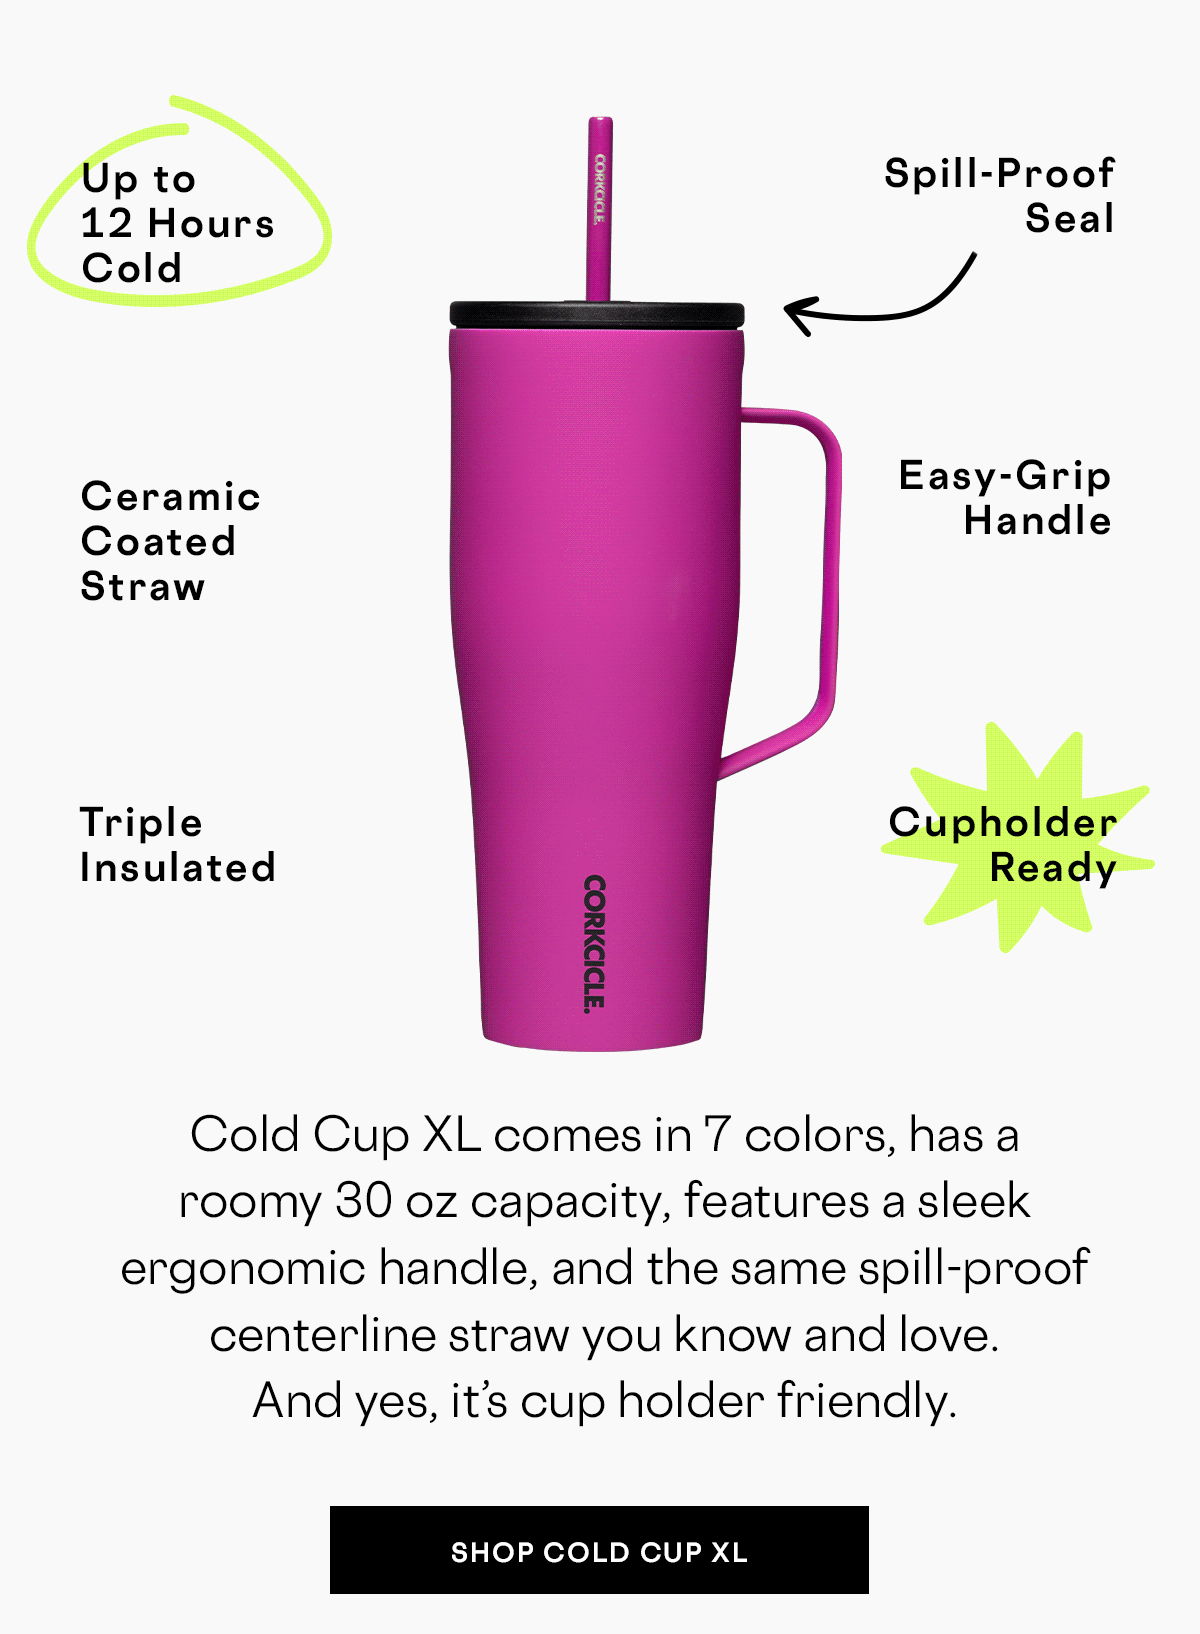 CORKCICLE: Get To Know Cold Cup XL | Milled